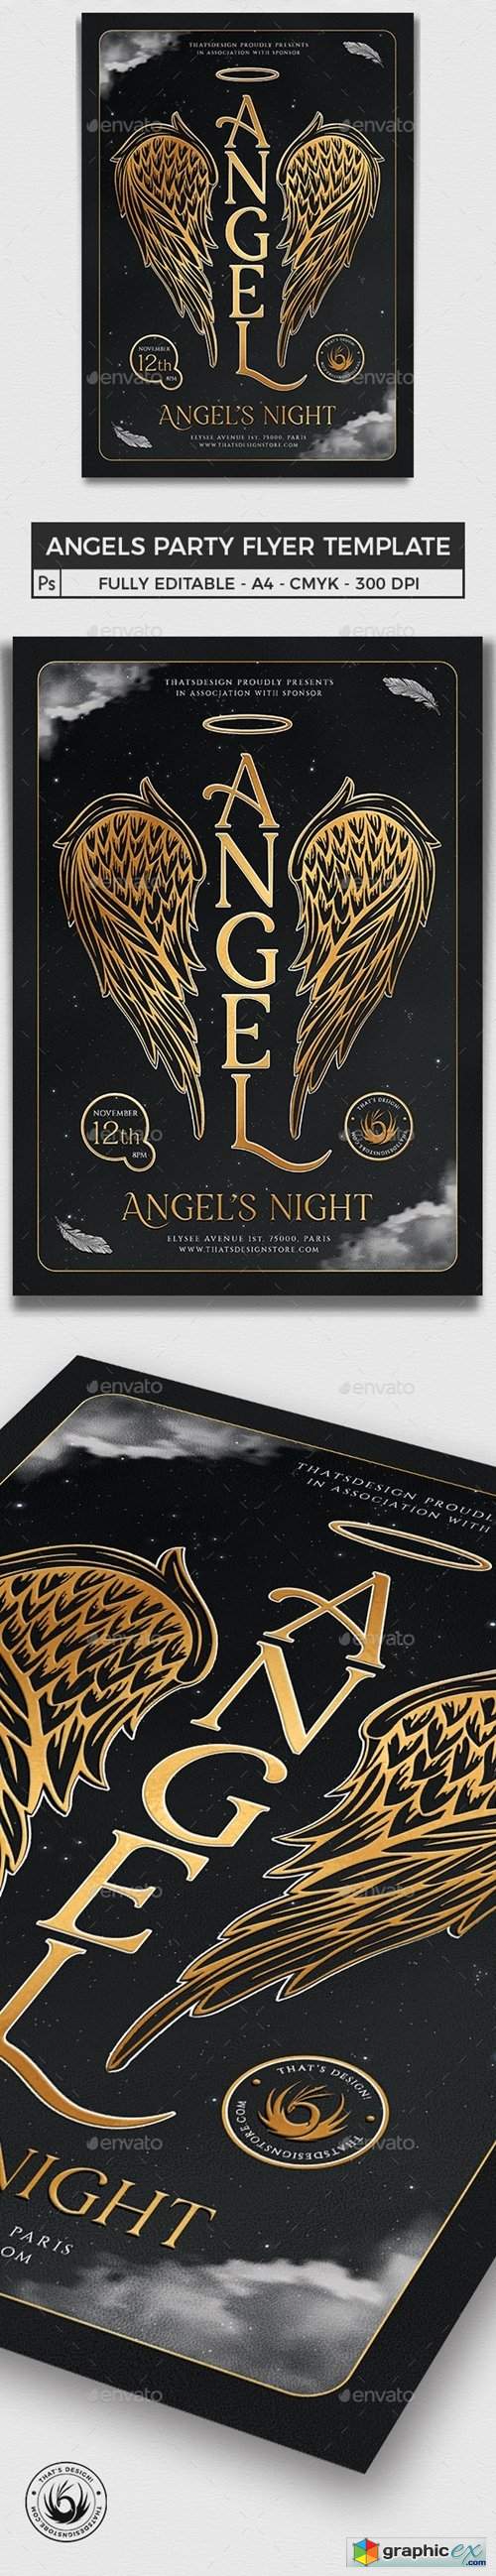 Angels Party Flyer Template V3 